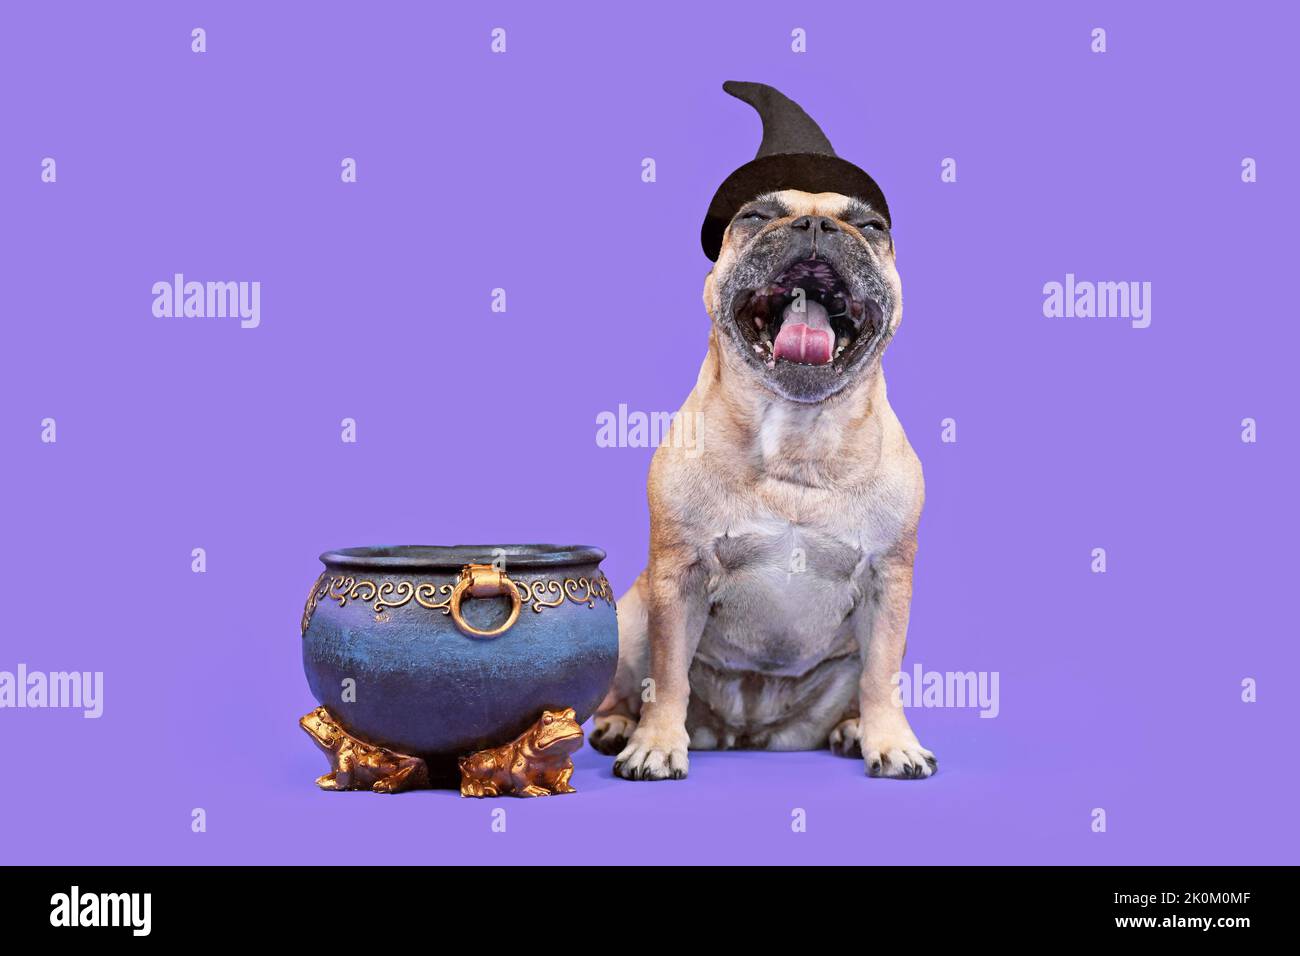 Laughing French Bulldog dog with Halloween costume witch hat next to cauldron on purple background Stock Photo